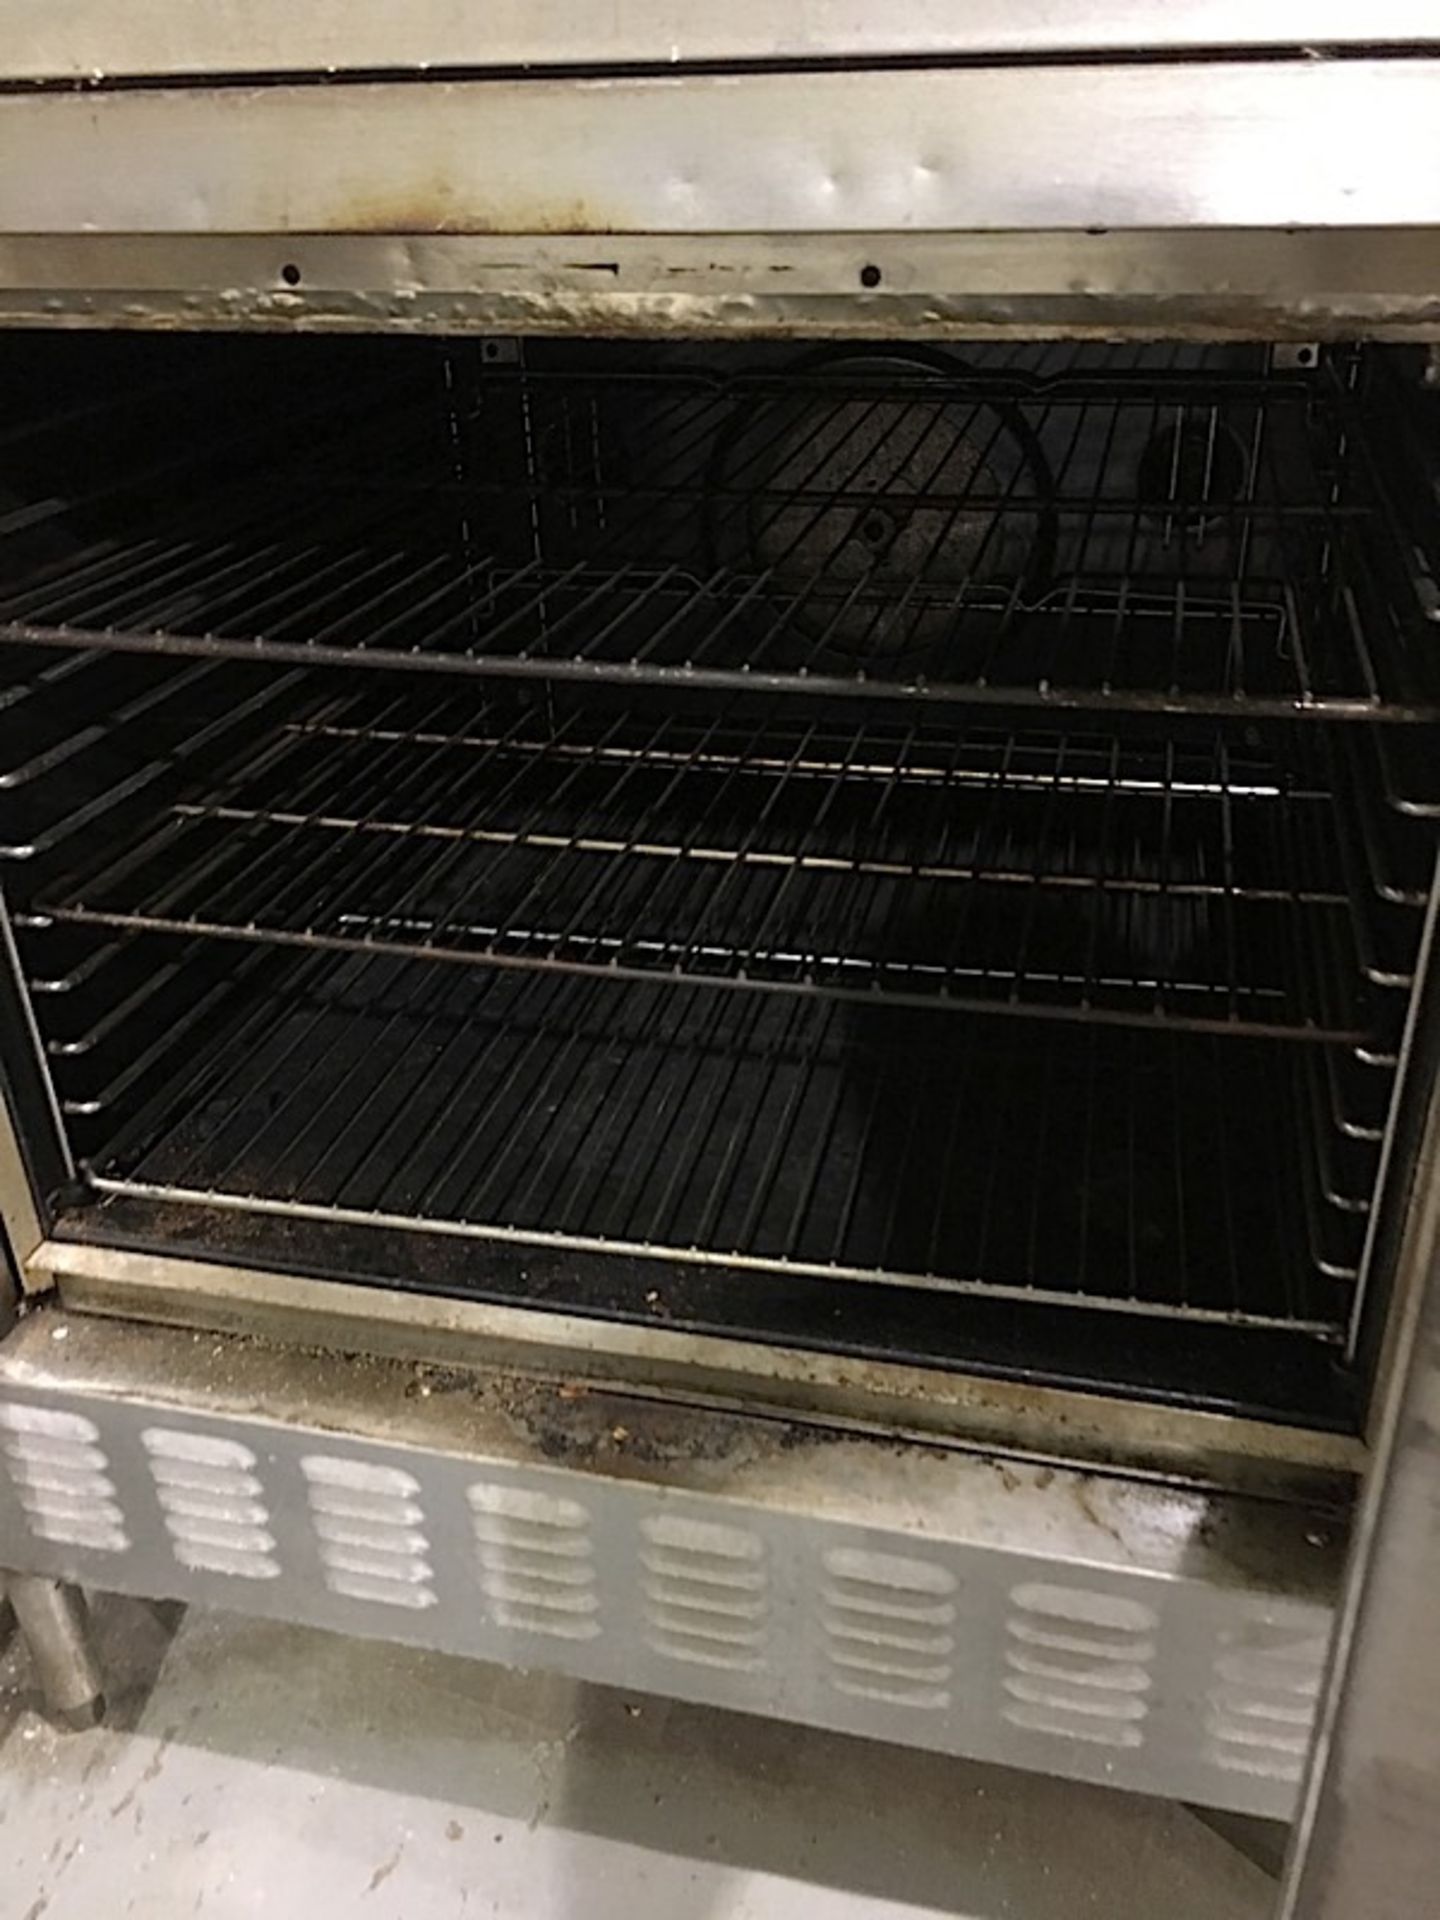 BLODGETT CONVECTION OVEN - Image 2 of 2